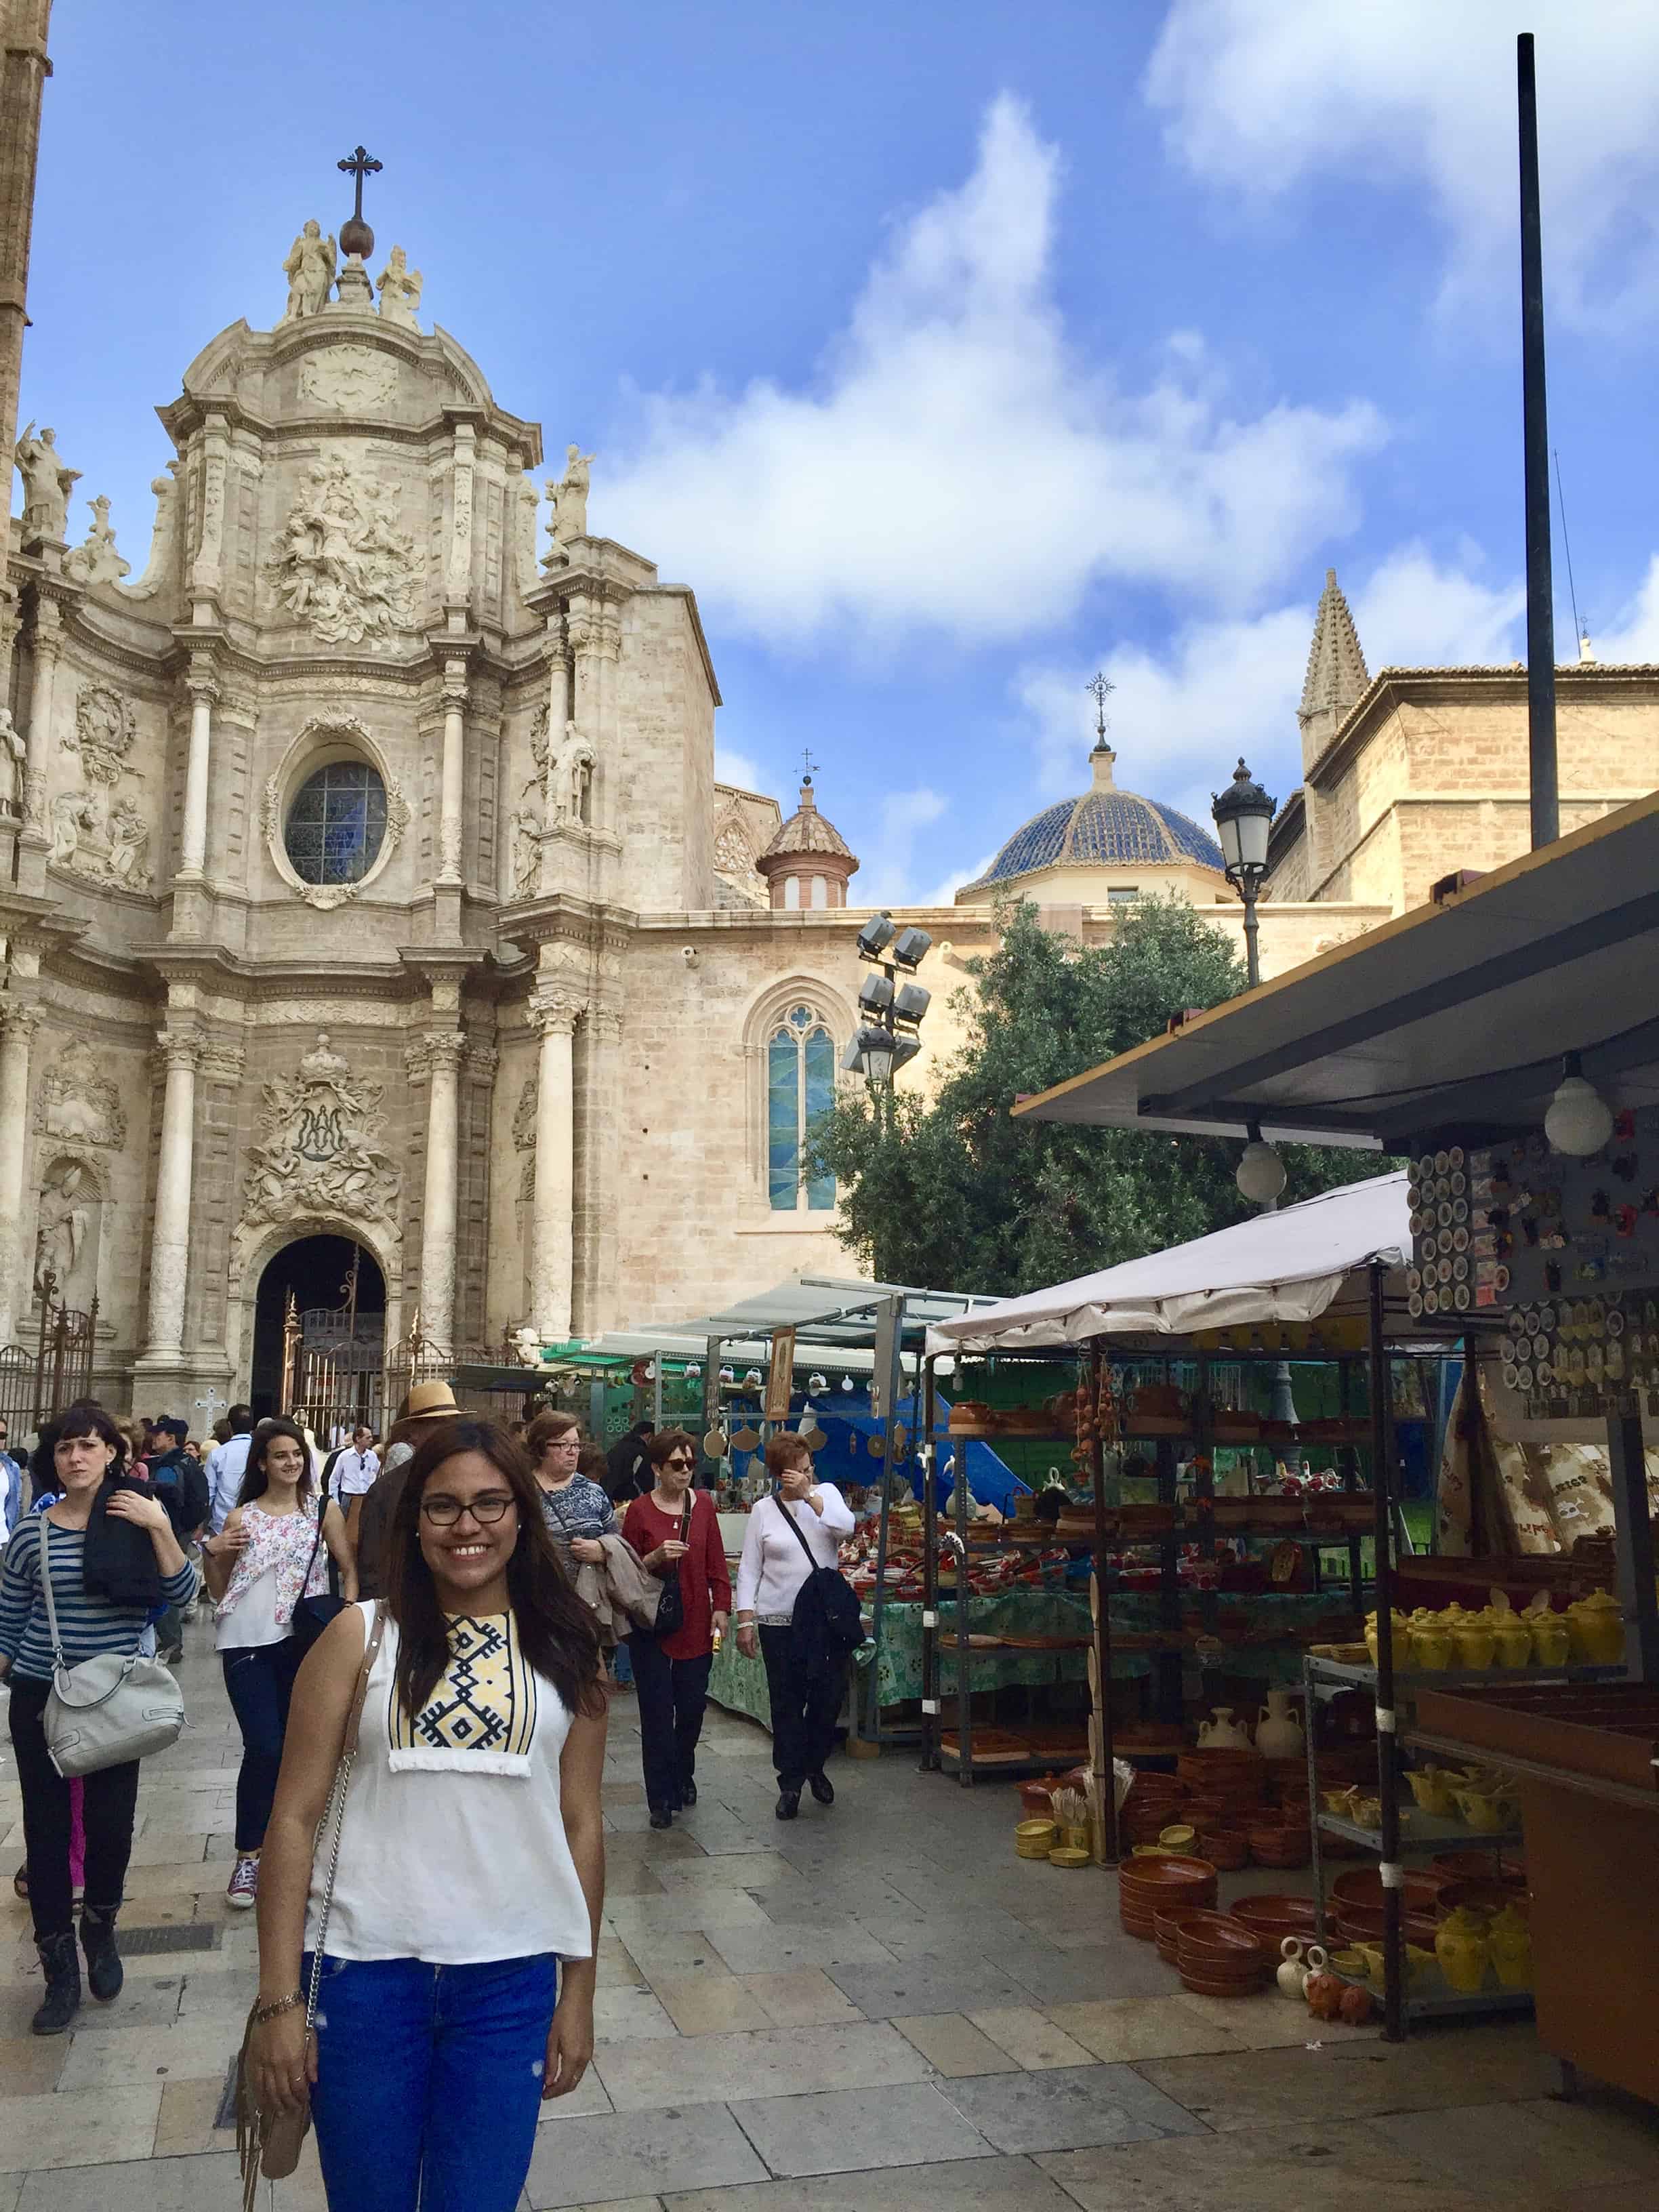 A picture of me being a tourist in Valencia, Spain. My friend whom I met in Madrid invited me to come visit her in her hometown. 